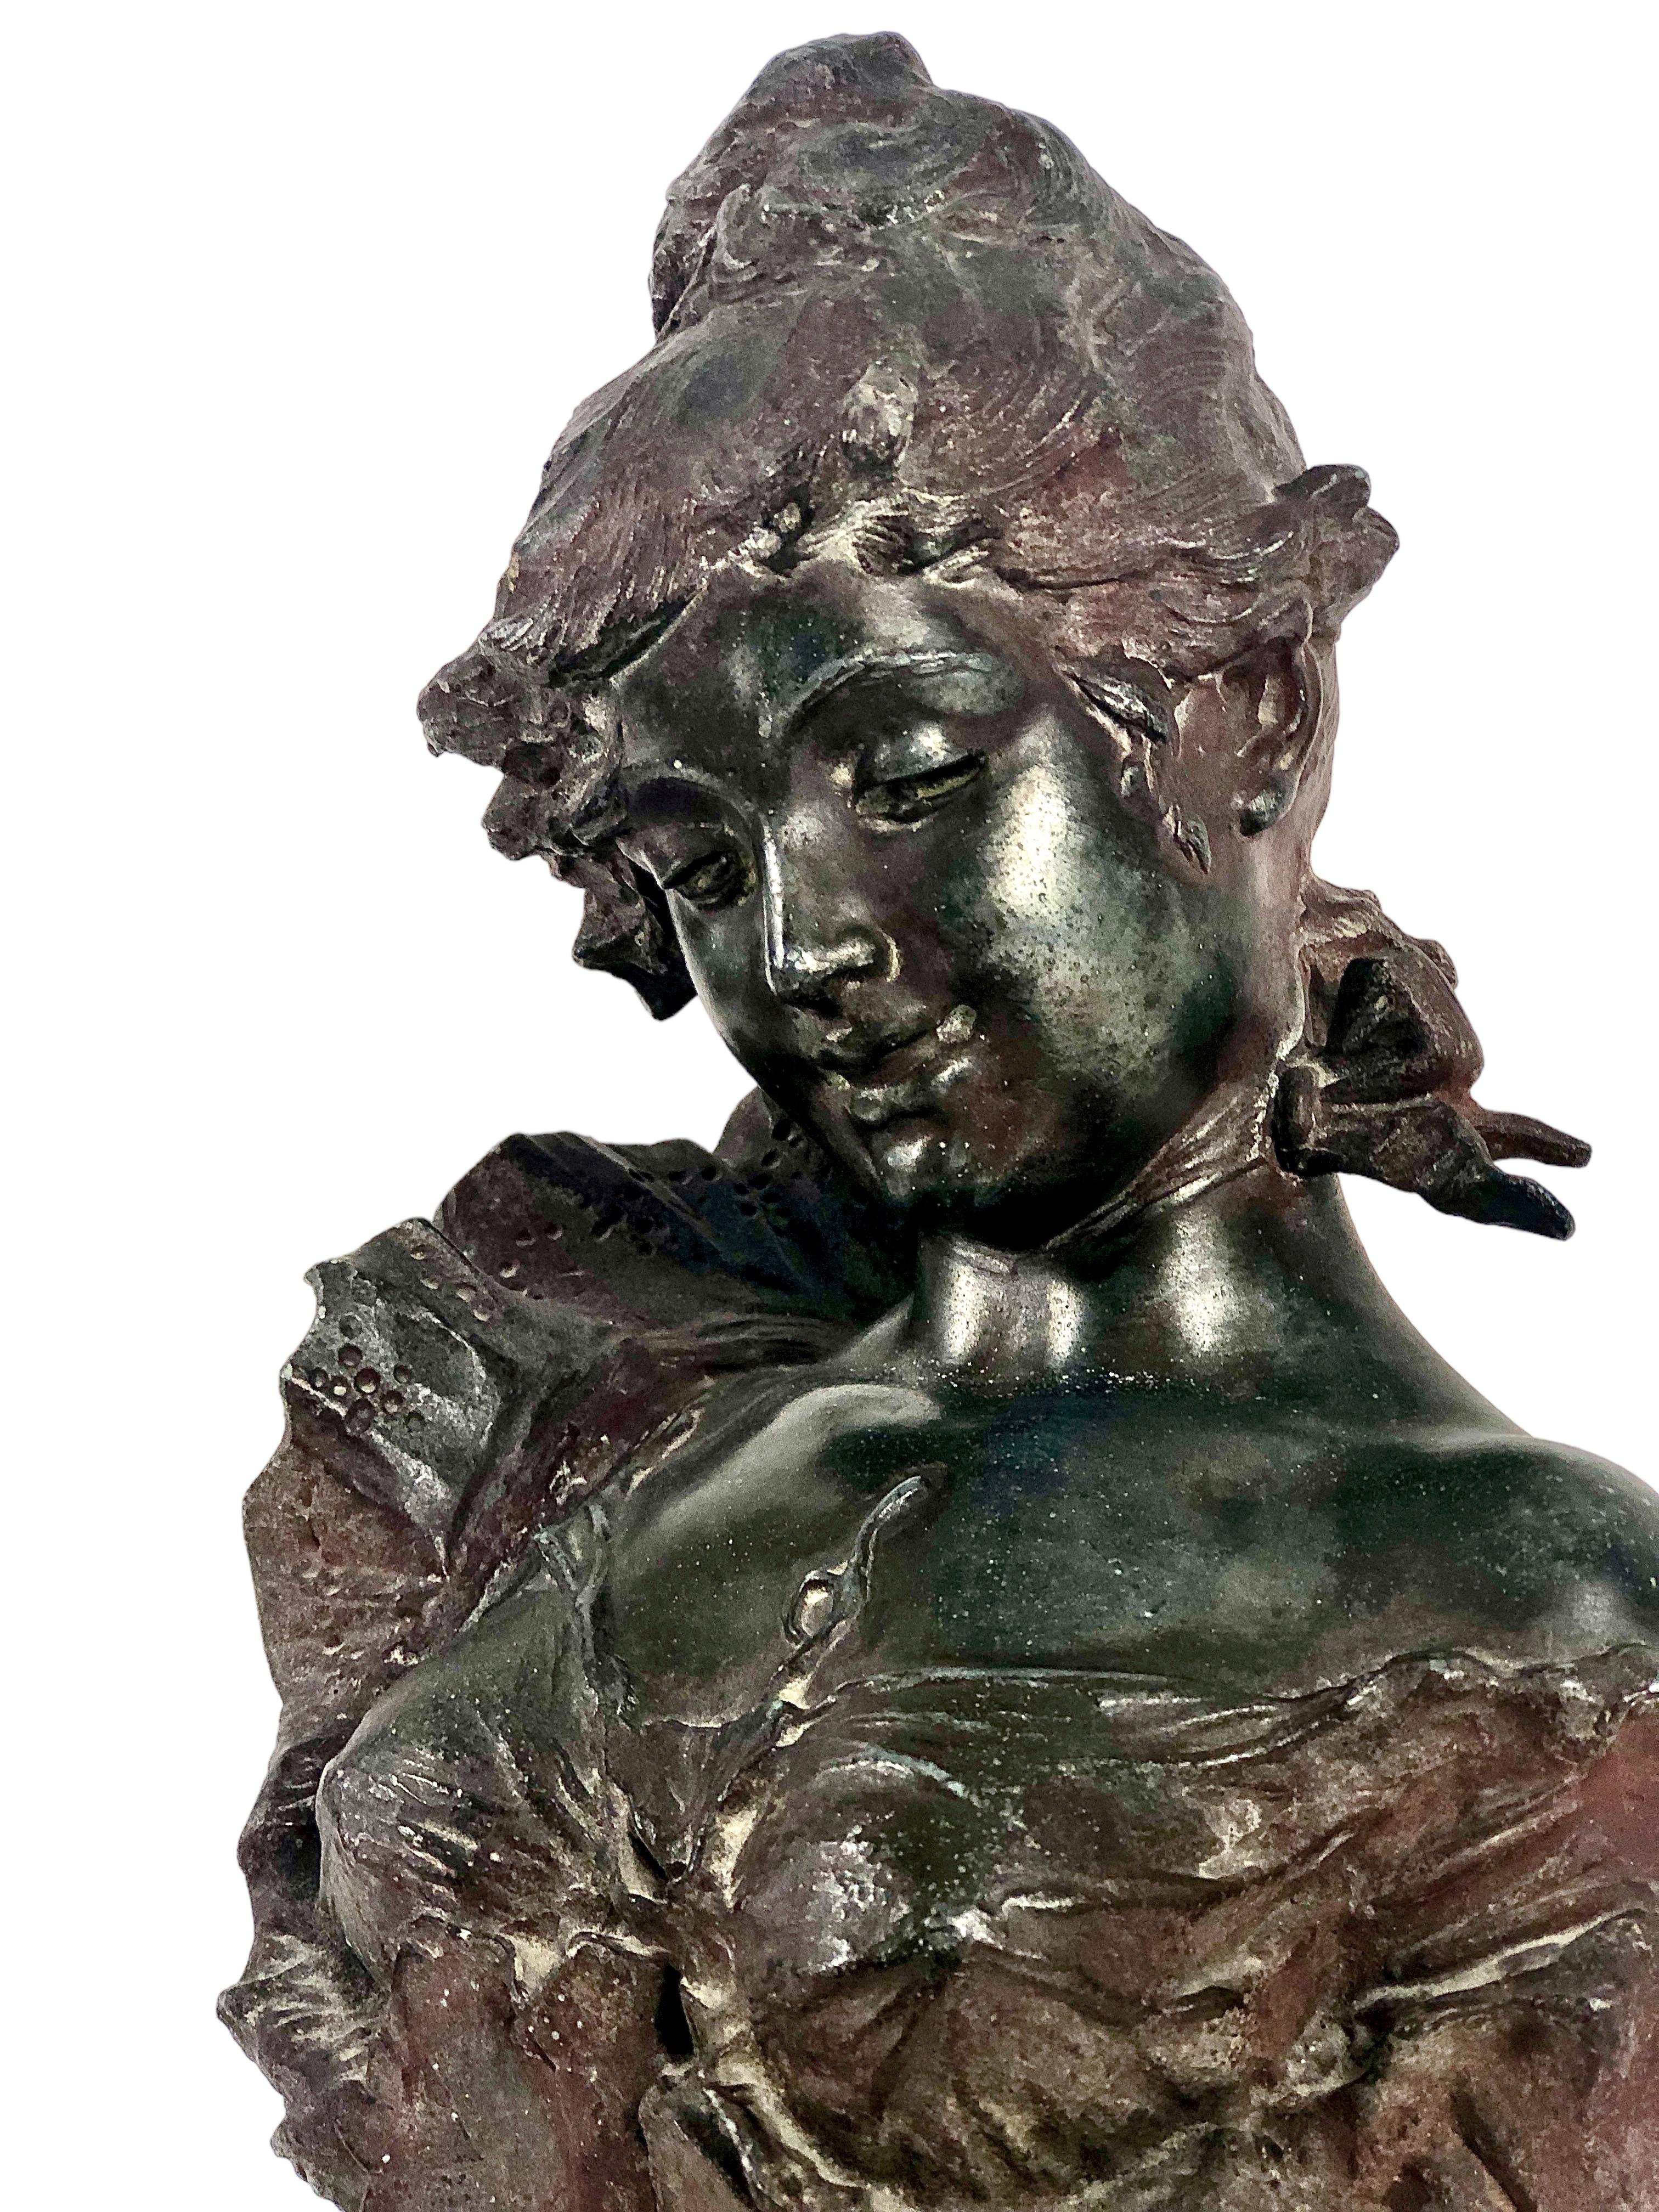 Polychromed cast aluminium “Art Nouveau” bust of a young woman dressed in a ruffled bustier. 

Entitled “Strawberries with Champagne”, it is signed on the left side with the sculptor’s full name, Alfred Jean Foretay, and the initials AF.

The